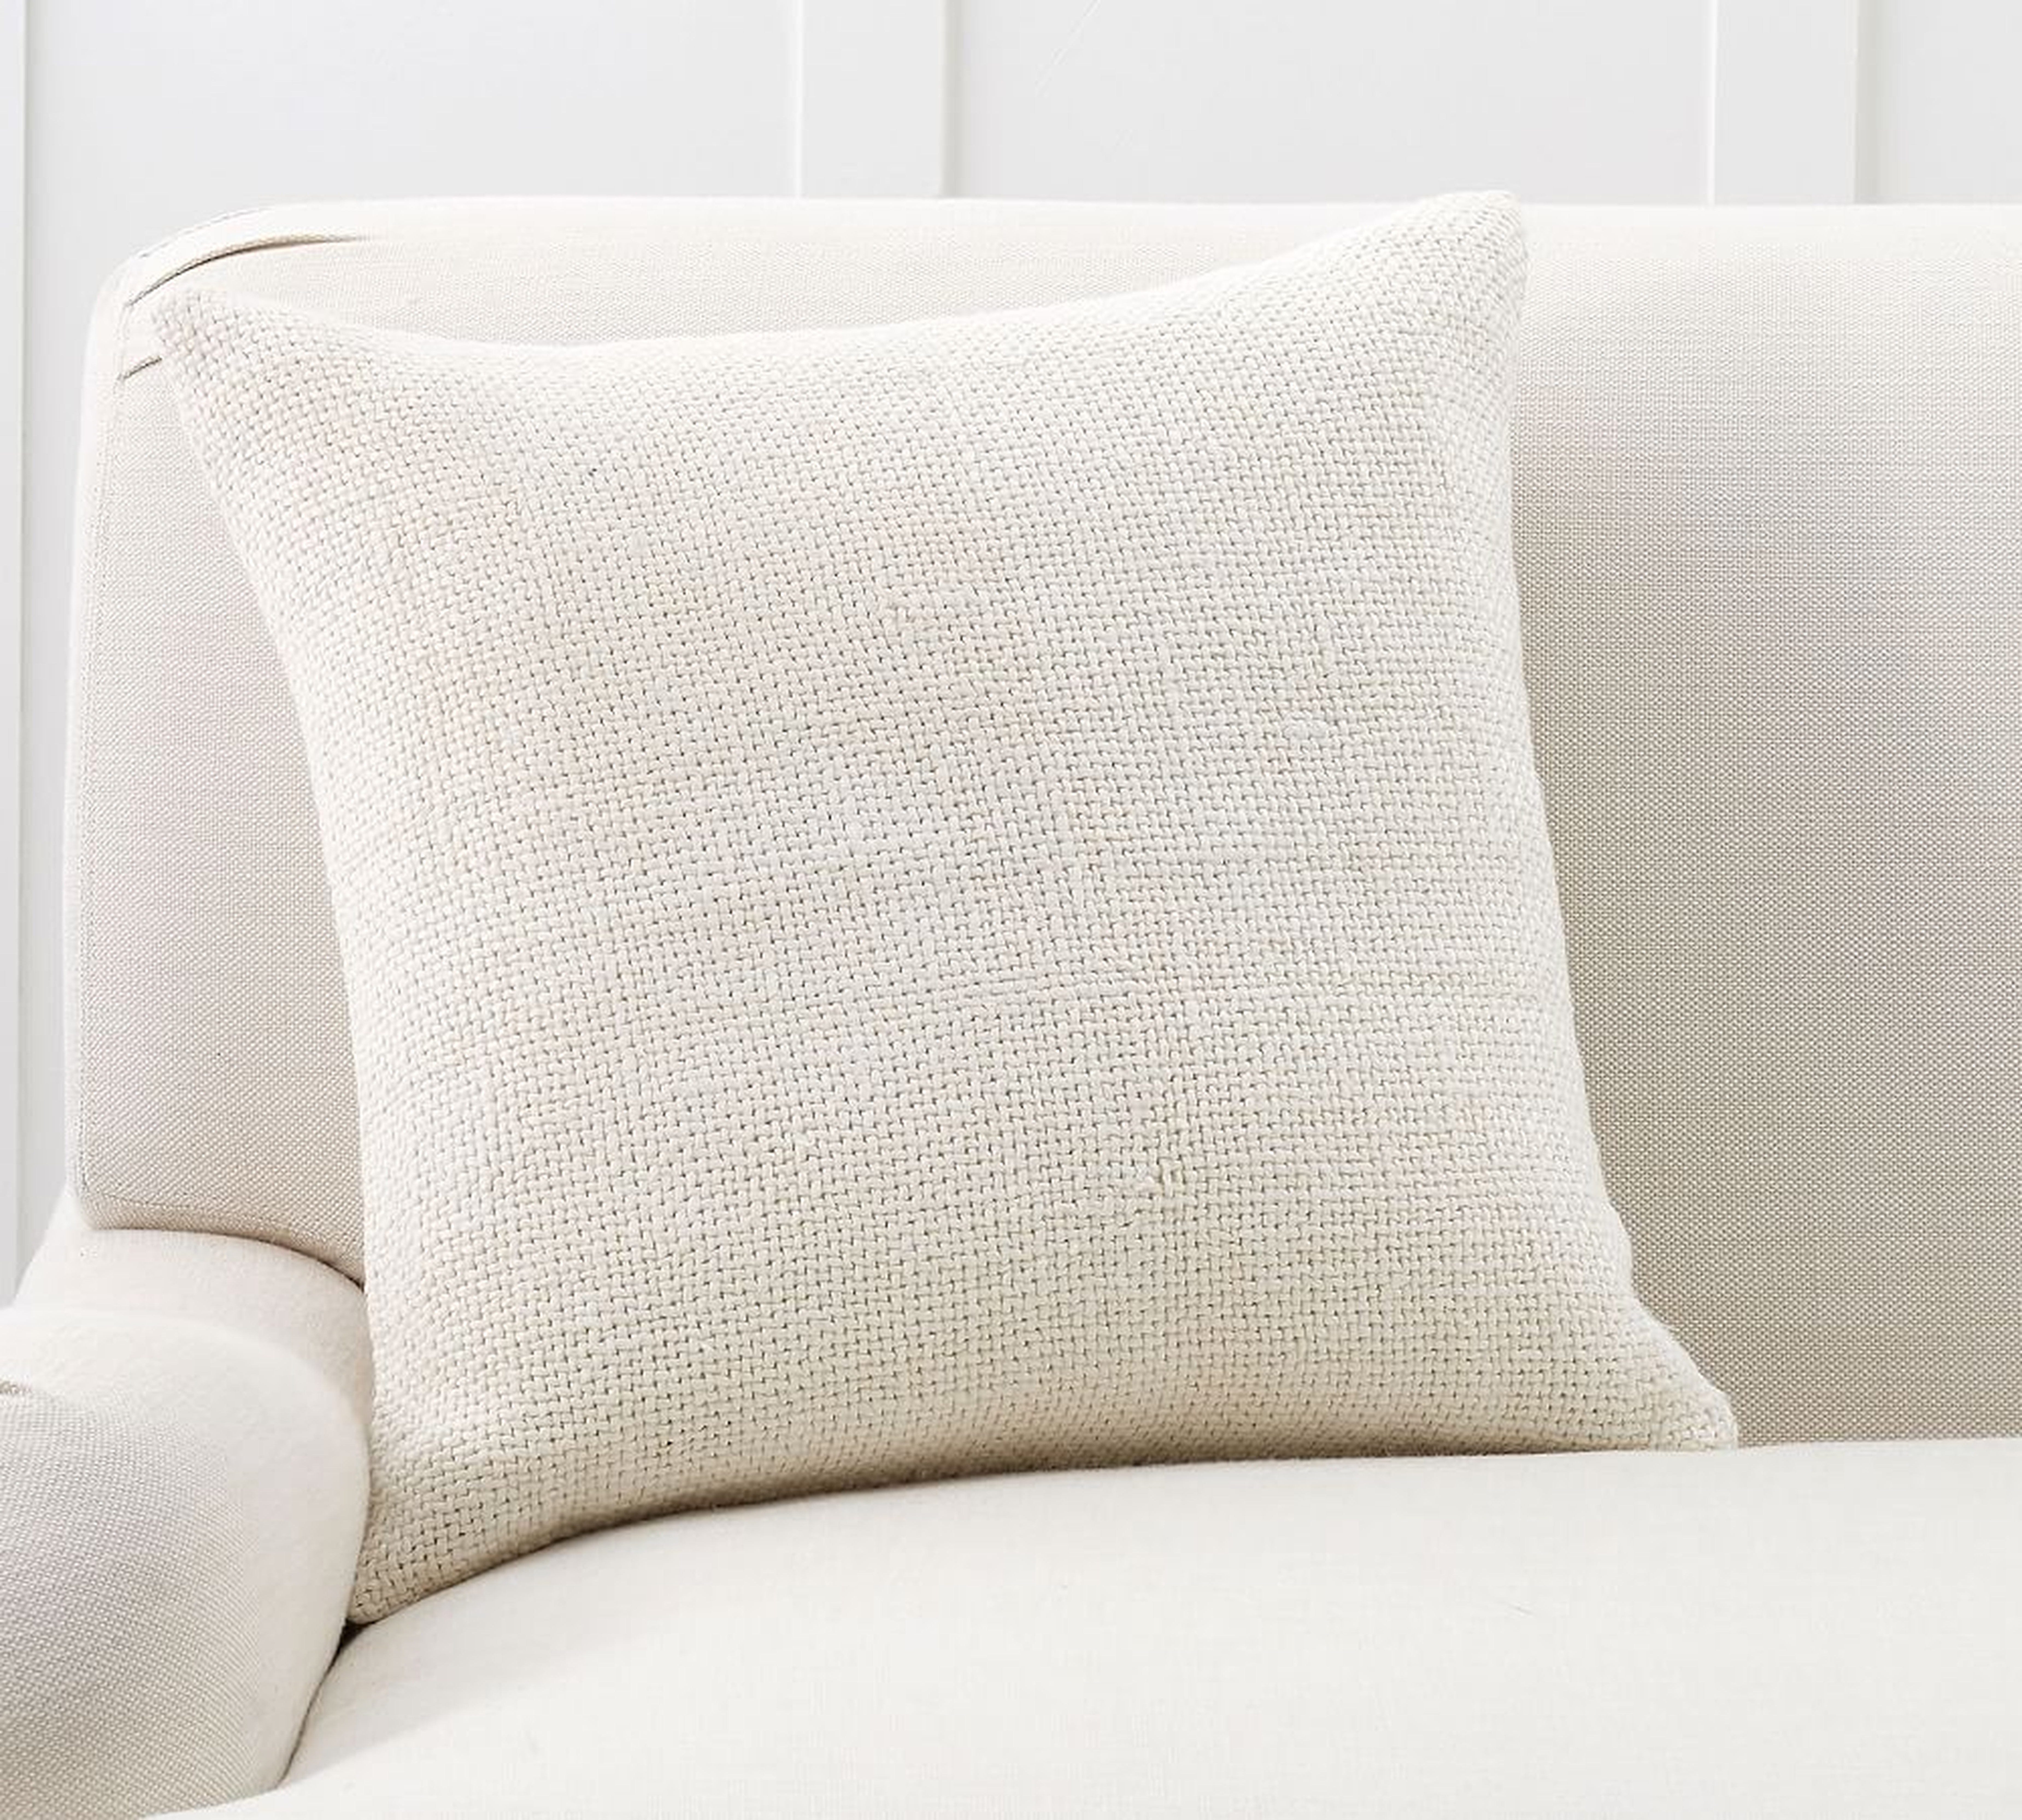 Faye Textured Linen Pillow Cover, Ivory, 20" x 20" - Pottery Barn